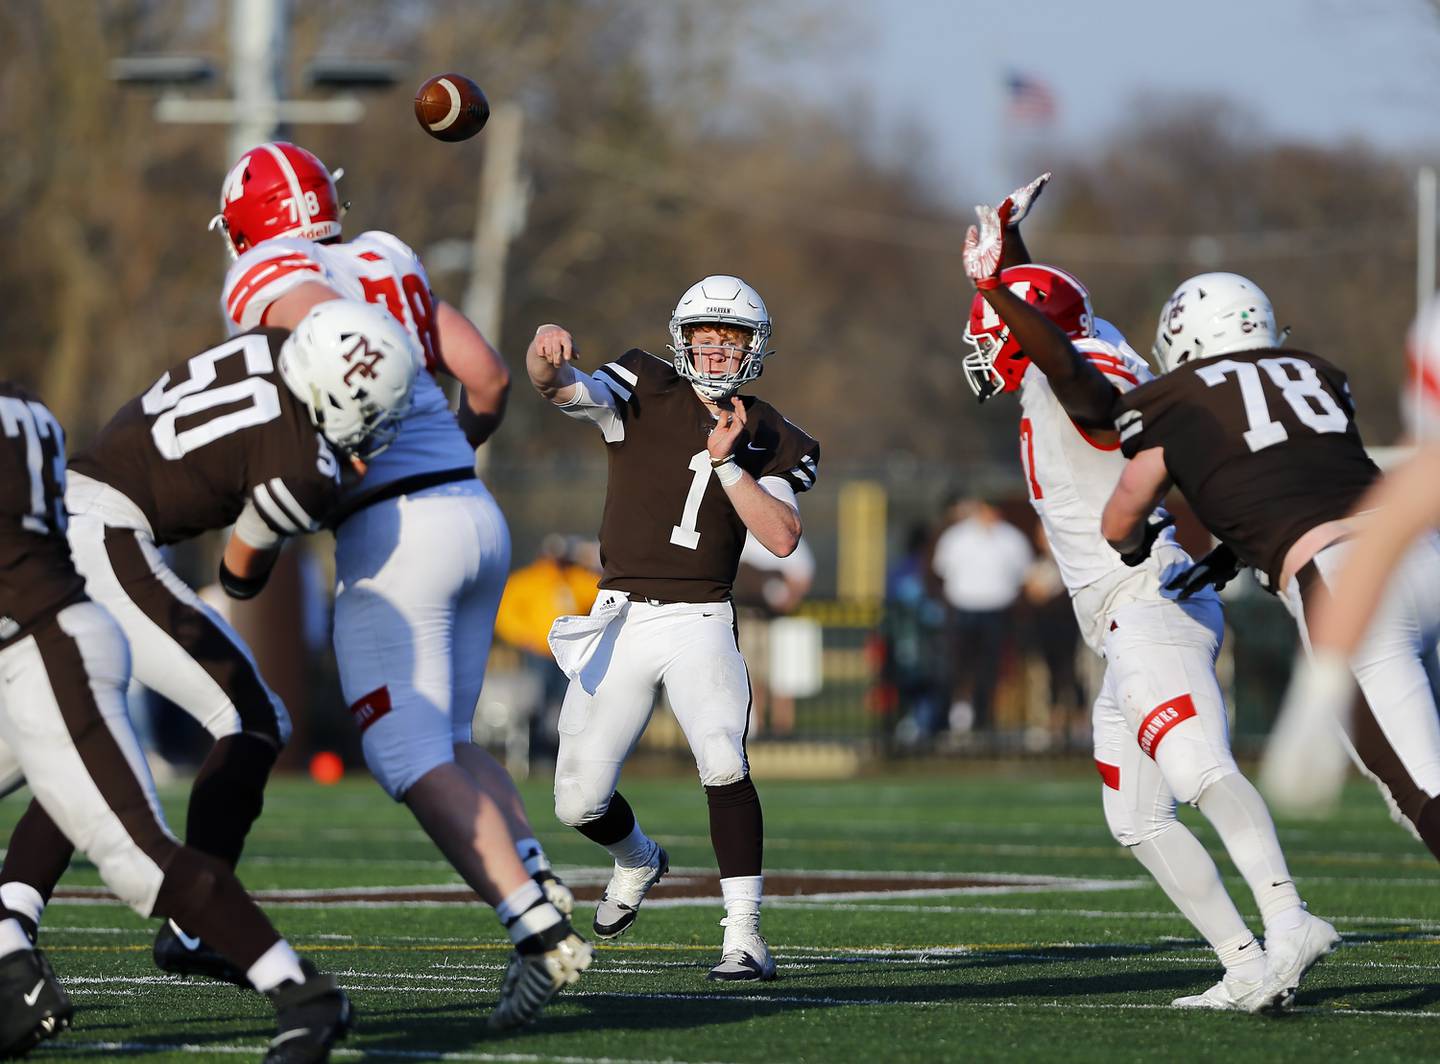 Mount Carmel's Justin Lynch passes the ball as the Marist RedHawk faced the Mount Carmel Caravan on Saturday, April 3, 2021 on Carey Field at Barda-Dowling Stadium in Chicago, IL. Mt. Carmel won 24-21.